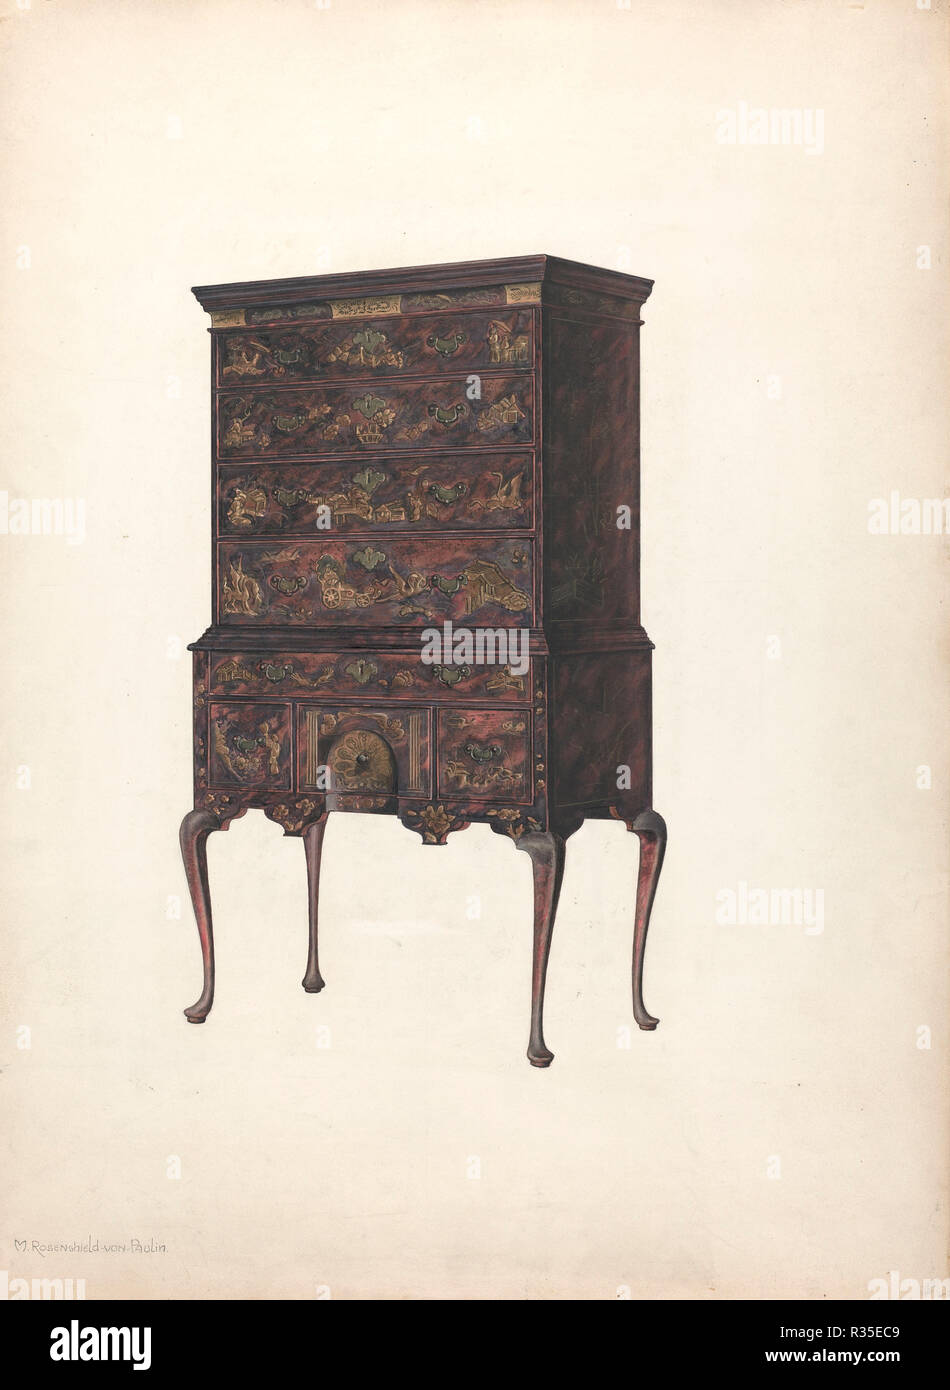 Highboy. Dated: c. 1940. Dimensions: overall: 72.4 x 53.6 cm (28 1/2 x 21 1/8 in.)  Original IAD Object: 70' high; 38 1/2' wide; 21 1/4' deep. Medium: watercolor, pen and ink, gouache, and graphite on paperboard. Museum: National Gallery of Art, Washington DC. Author: M. Rosenshield-von-Paulin. Stock Photo